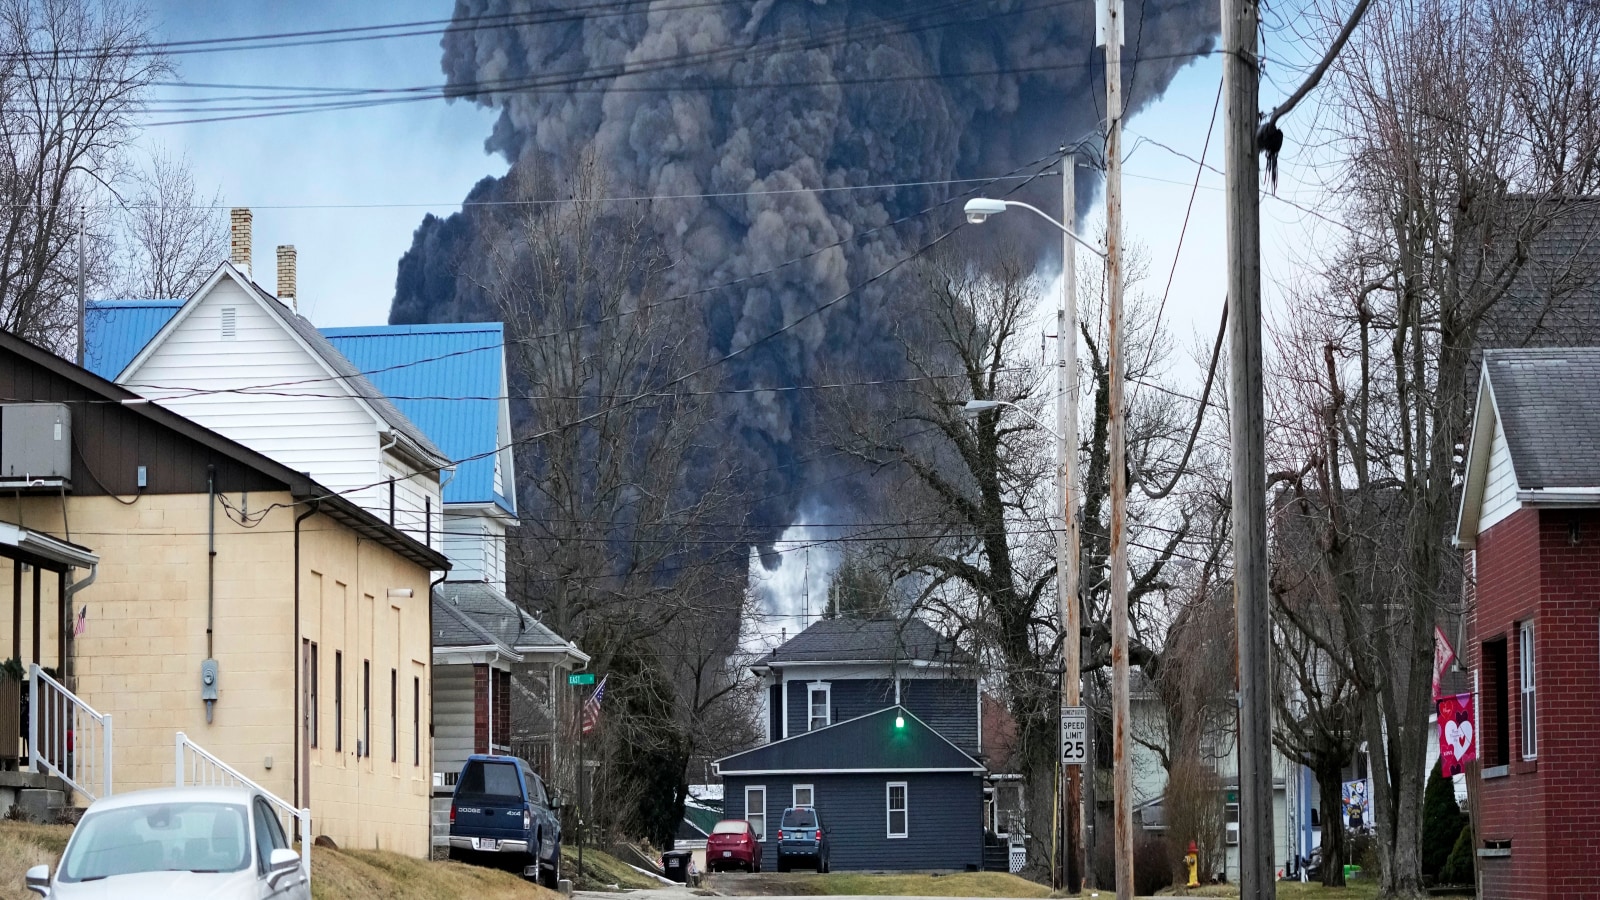 Residents in Ohio Town Worry after Controlled Blast Carried Out to Stop